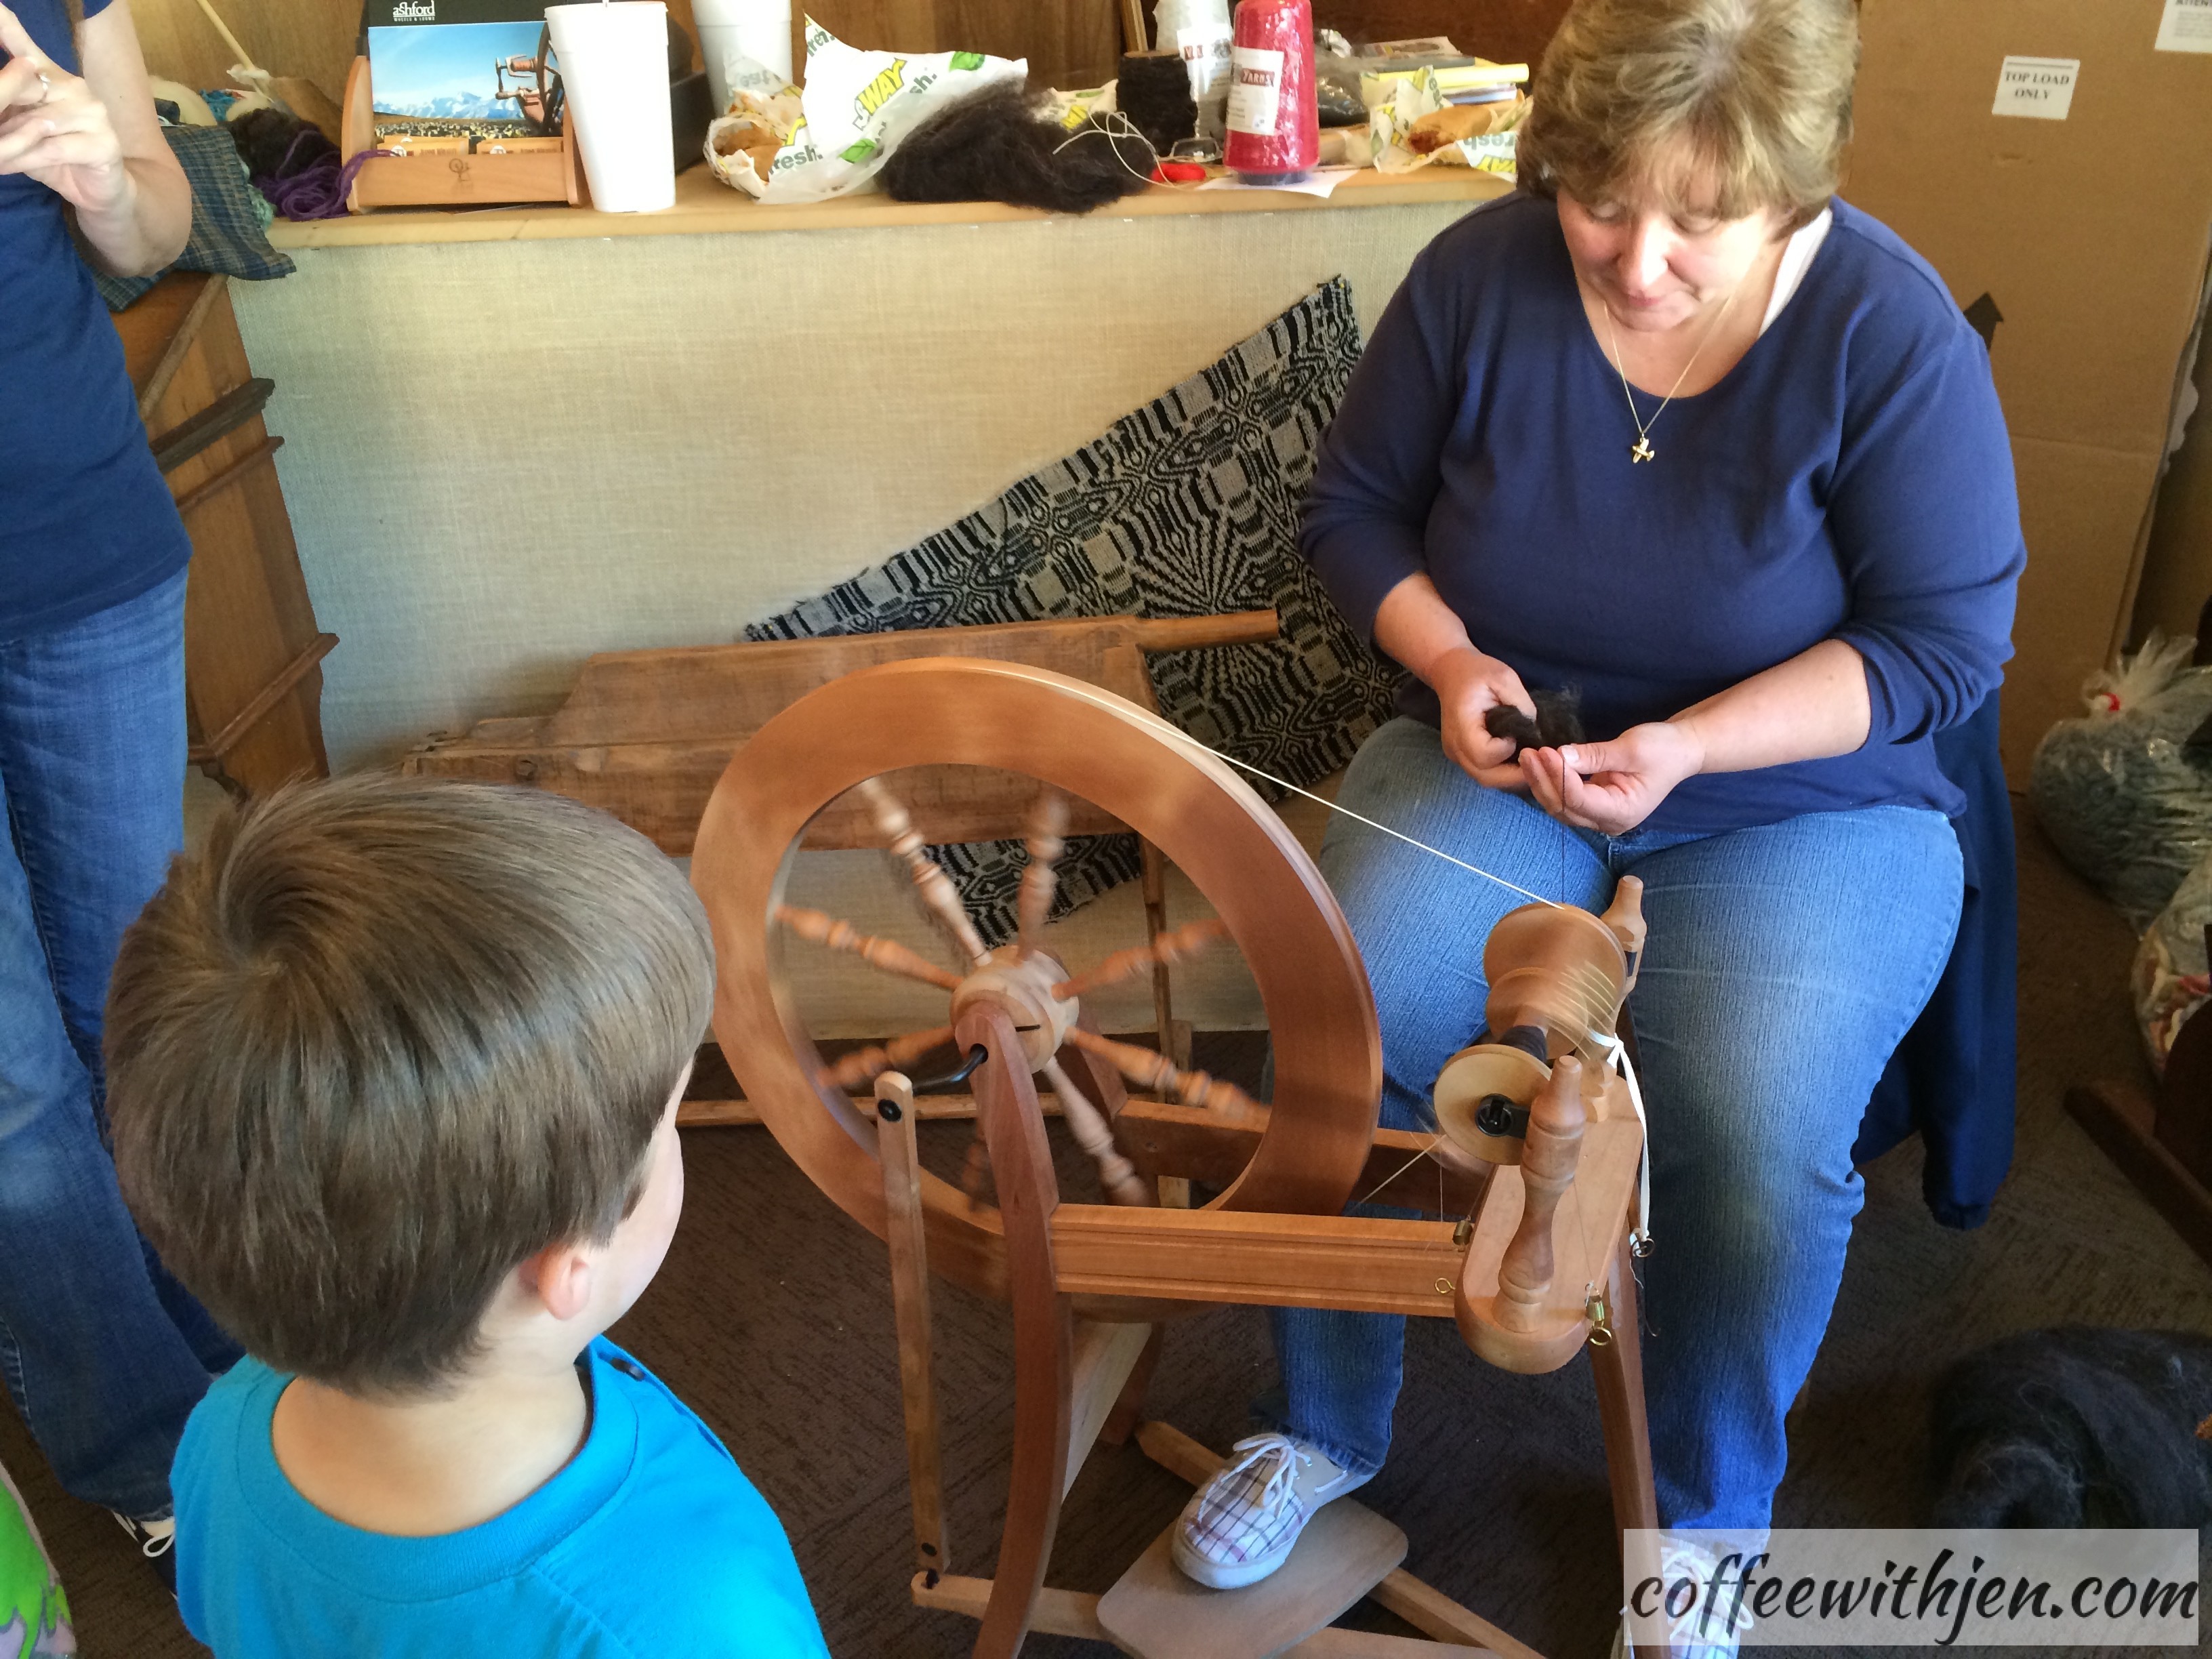 This was a live demonstration on how to spin wool into yarn.  See below for information on taking spinning and weaving classes.  